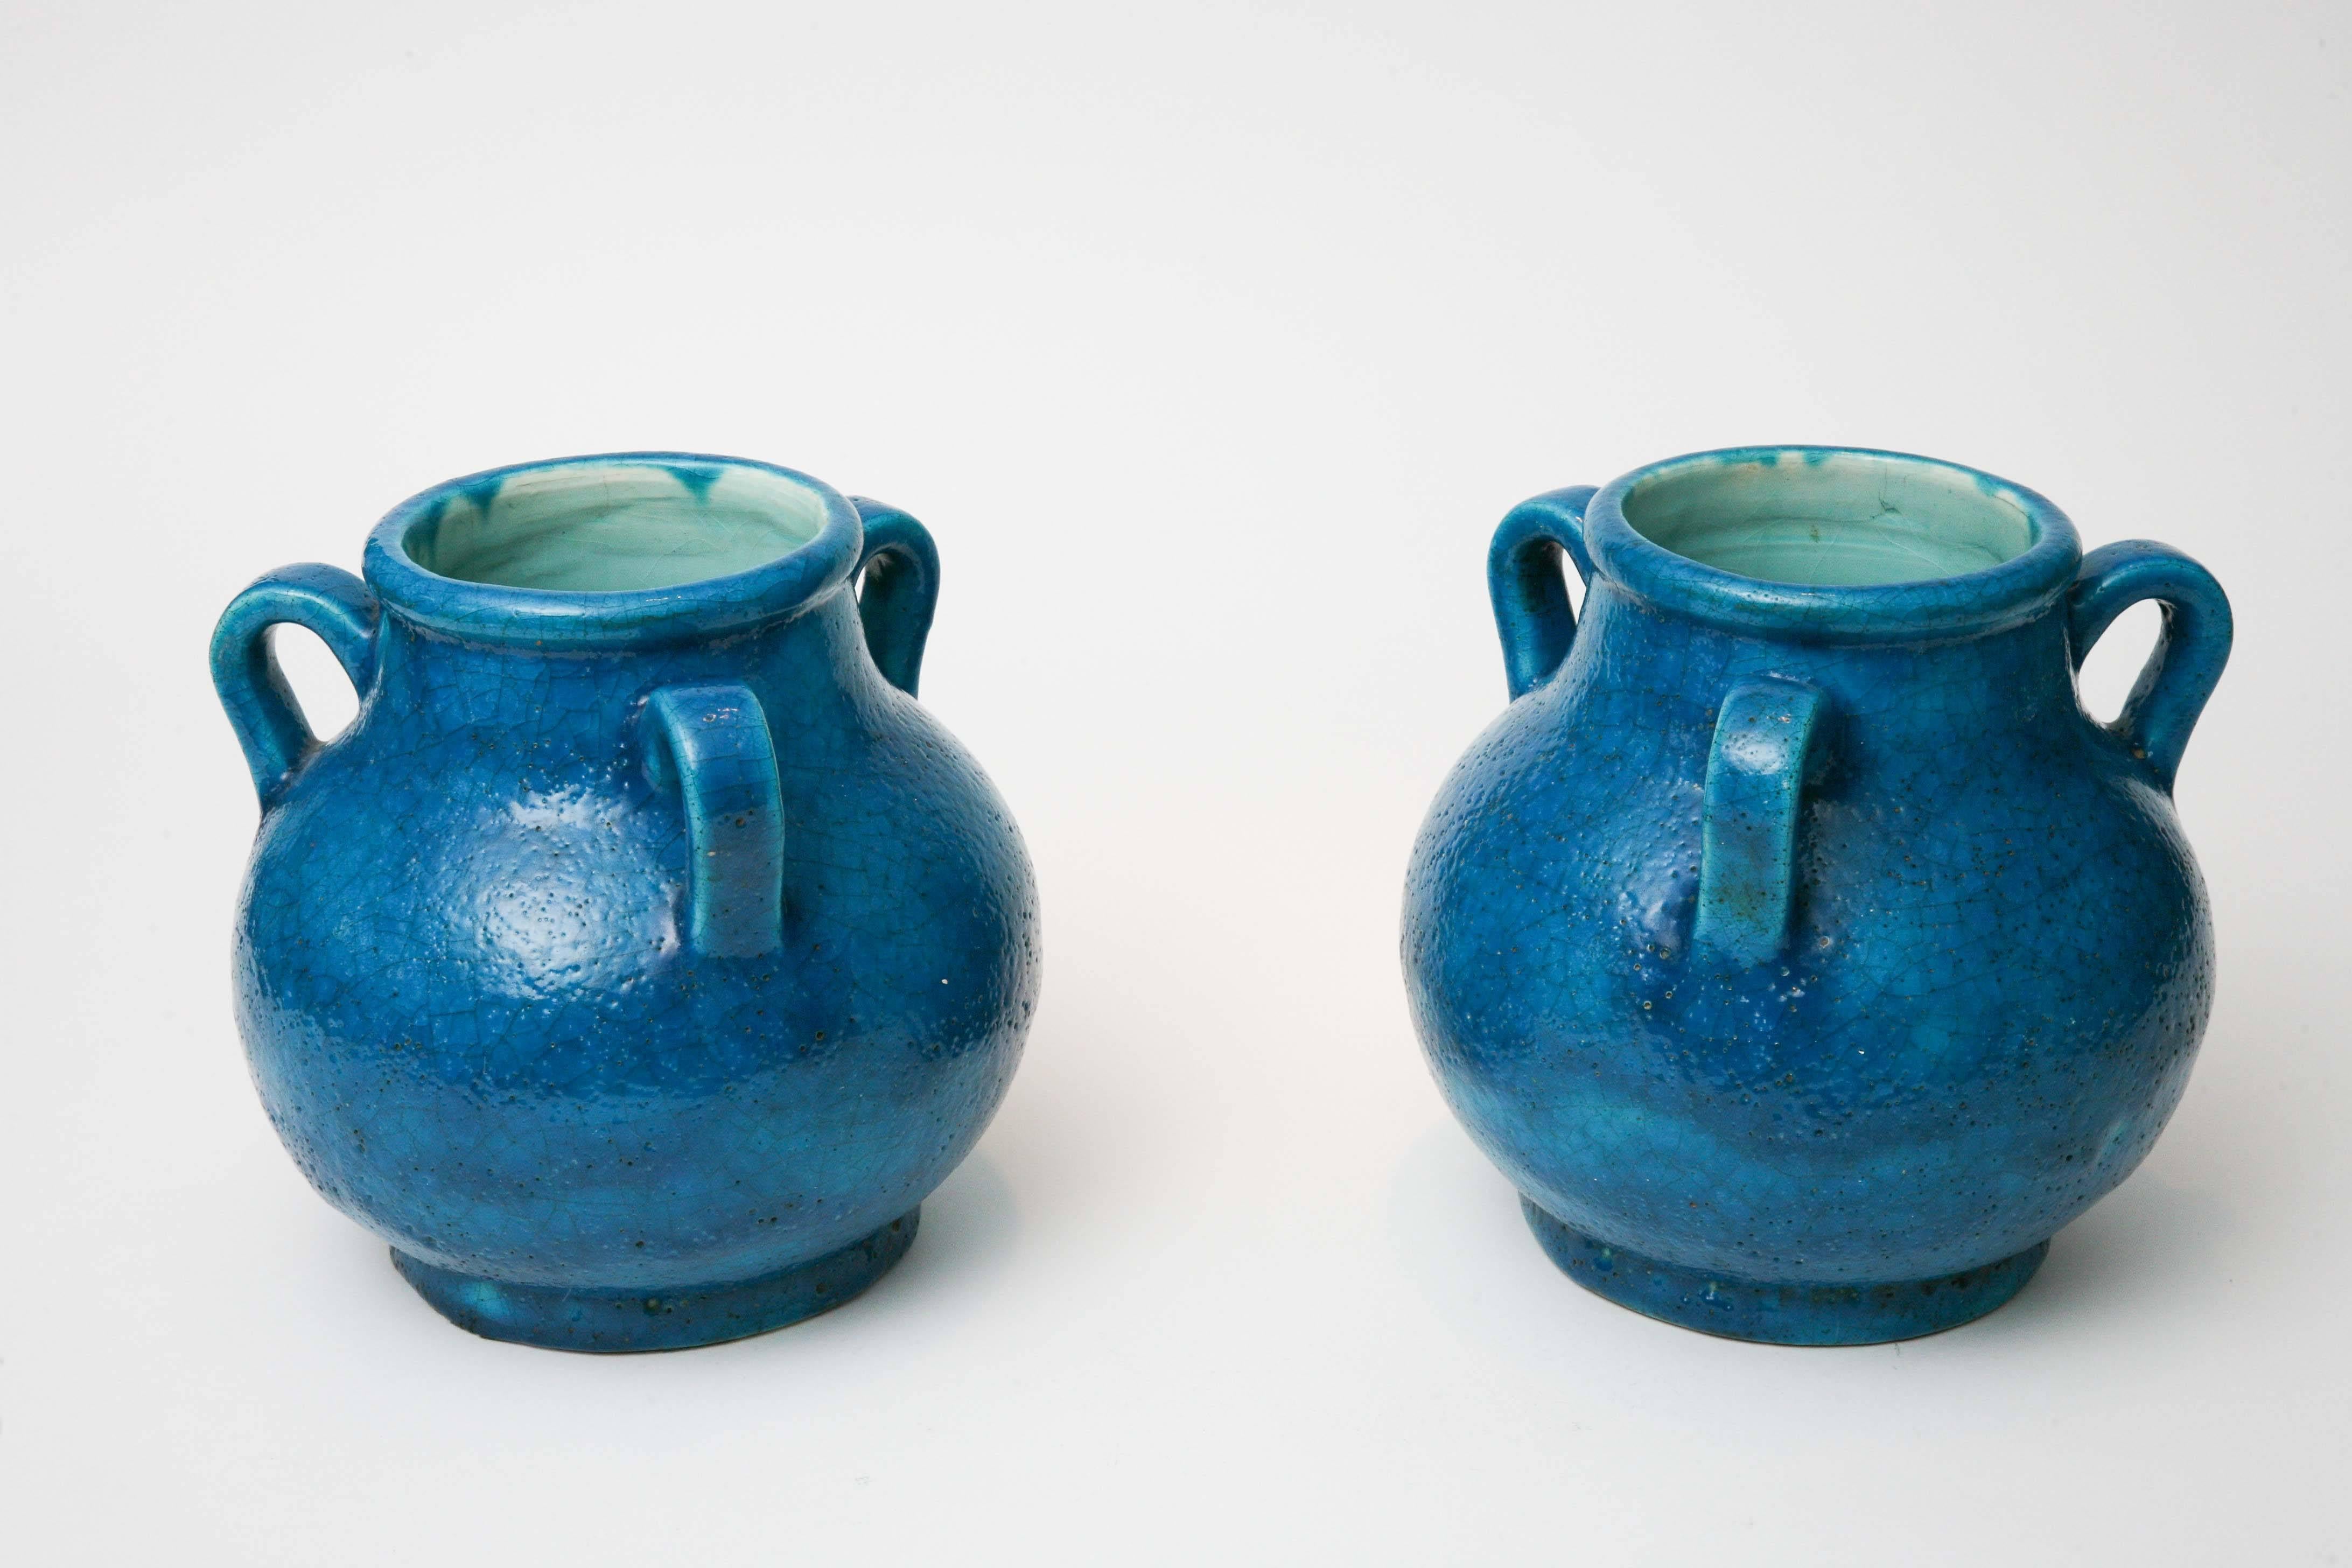 This attractive pair of faience vases are in the manner of Edmond Lachenal but are labeled simply 